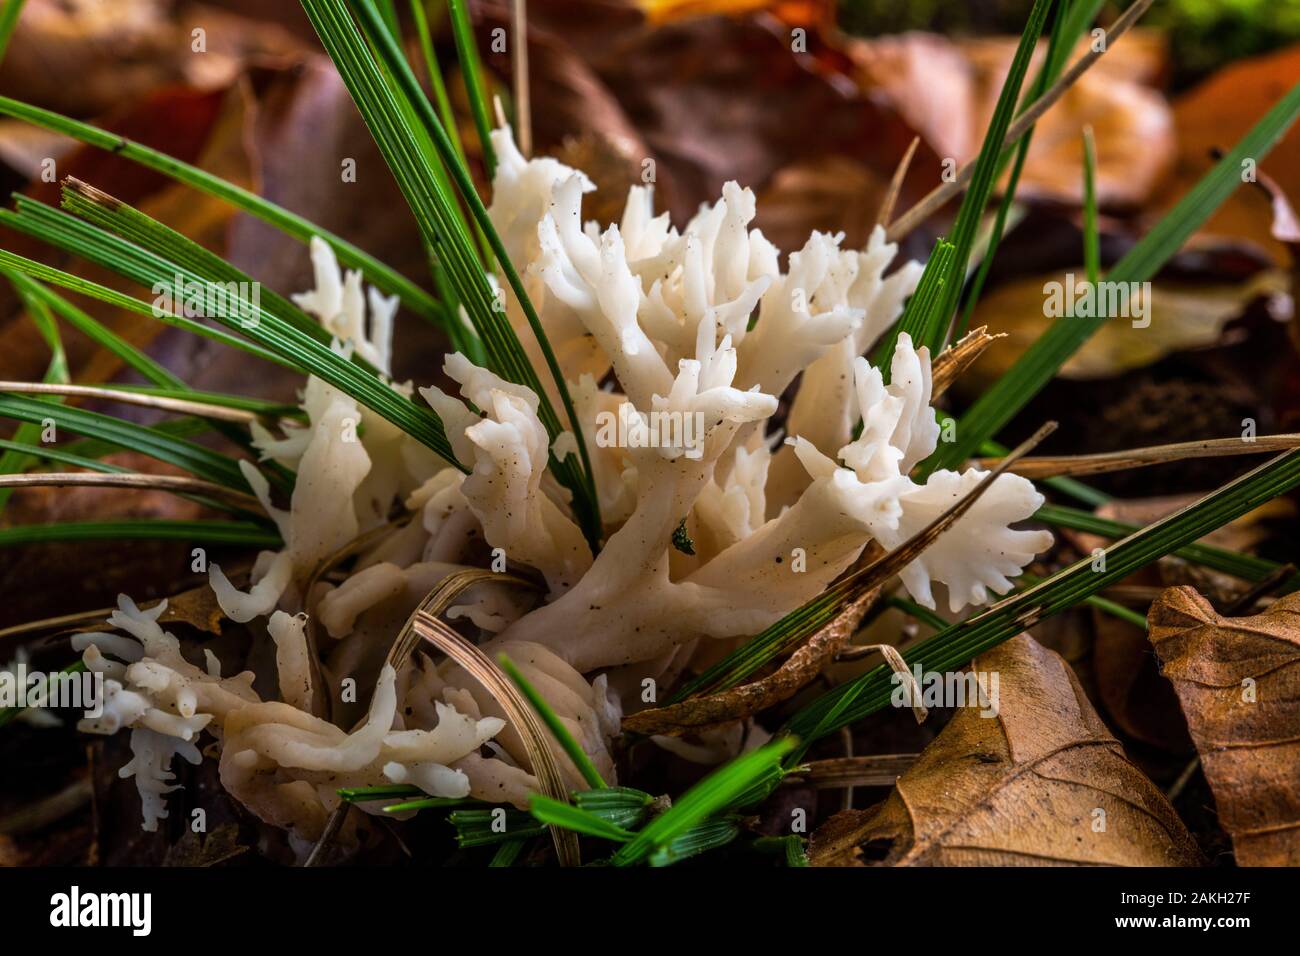 France, Somme, Crecy en Ponthieu, Crecy Forest, forest mushrooms, ramaria formosa Stock Photo